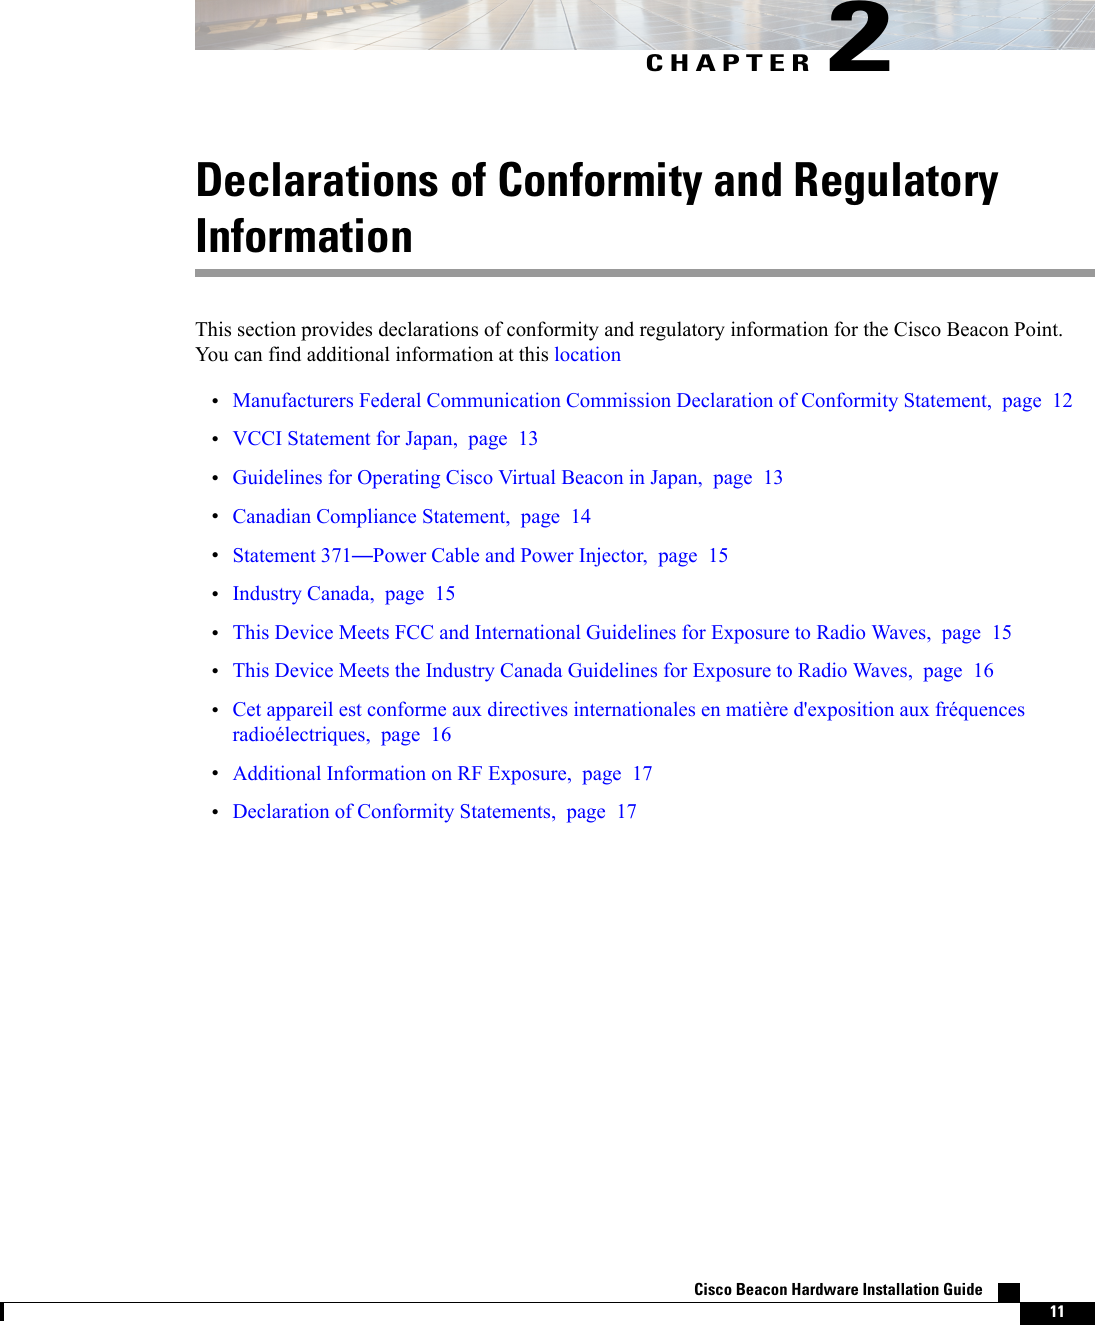 CHAPTER 2Declarations of Conformity and RegulatoryInformationThis section provides declarations of conformity and regulatory information for the Cisco Beacon Point.You can find additional information at this location•Manufacturers Federal Communication Commission Declaration of Conformity Statement, page 12•VCCI Statement for Japan, page 13•Guidelines for Operating Cisco Virtual Beacon in Japan, page 13•Canadian Compliance Statement, page 14•Statement 371—Power Cable and Power Injector, page 15•Industry Canada, page 15•This Device Meets FCC and International Guidelines for Exposure to Radio Waves, page 15•This Device Meets the Industry Canada Guidelines for Exposure to Radio Waves, page 16•Cet appareil est conforme aux directives internationales en matière d&apos;exposition aux fréquencesradioélectriques, page 16•Additional Information on RF Exposure, page 17•Declaration of Conformity Statements, page 17Cisco Beacon Hardware Installation Guide    11